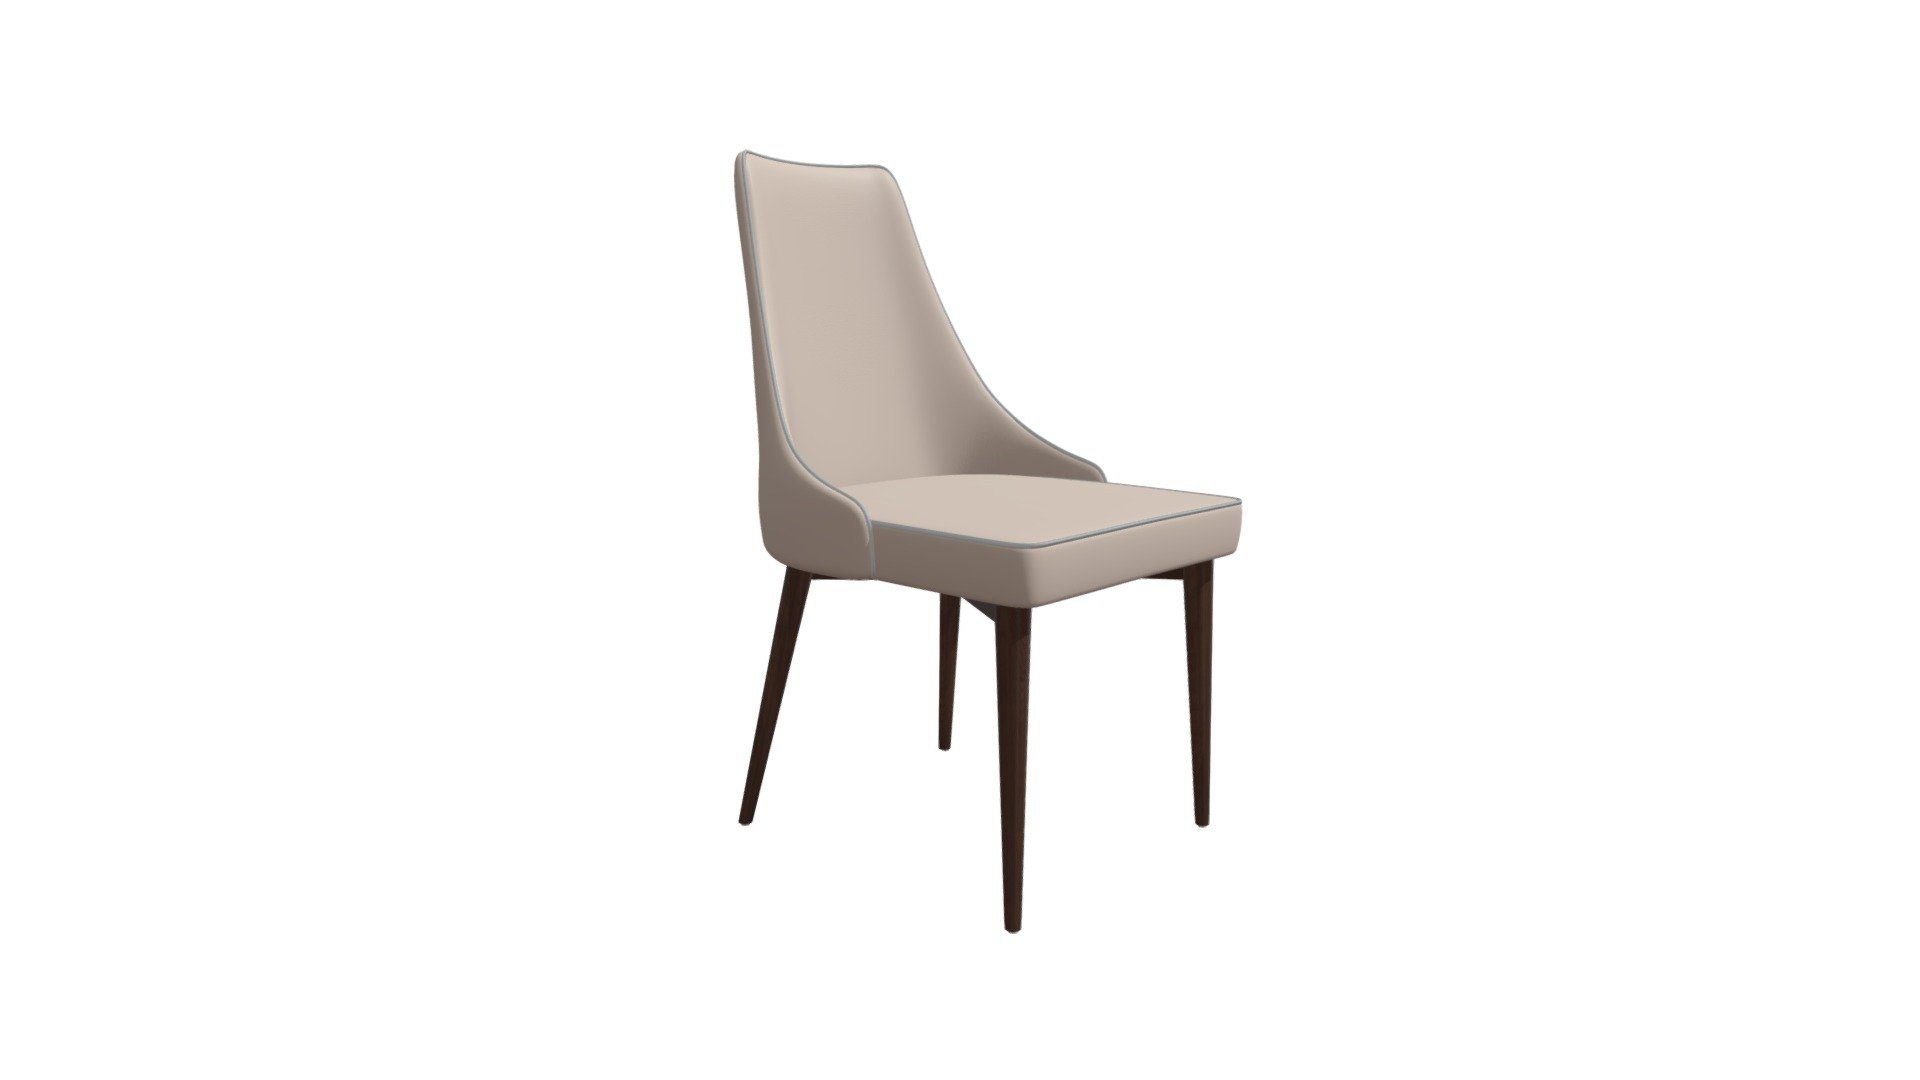 Moor dining chair features an exquisite slim wing back style back and plush seat with contrasting accent trim detail and a sturdy all wood base in warm walnut finish. Color options soft leatherette in either dark grey or beige with white trim. https://zuomod.com/moor-dining-chair-beige - Moor Dining Chair Beige - 100277 - 3D model by Zuo Modern (@zuo) 3d model